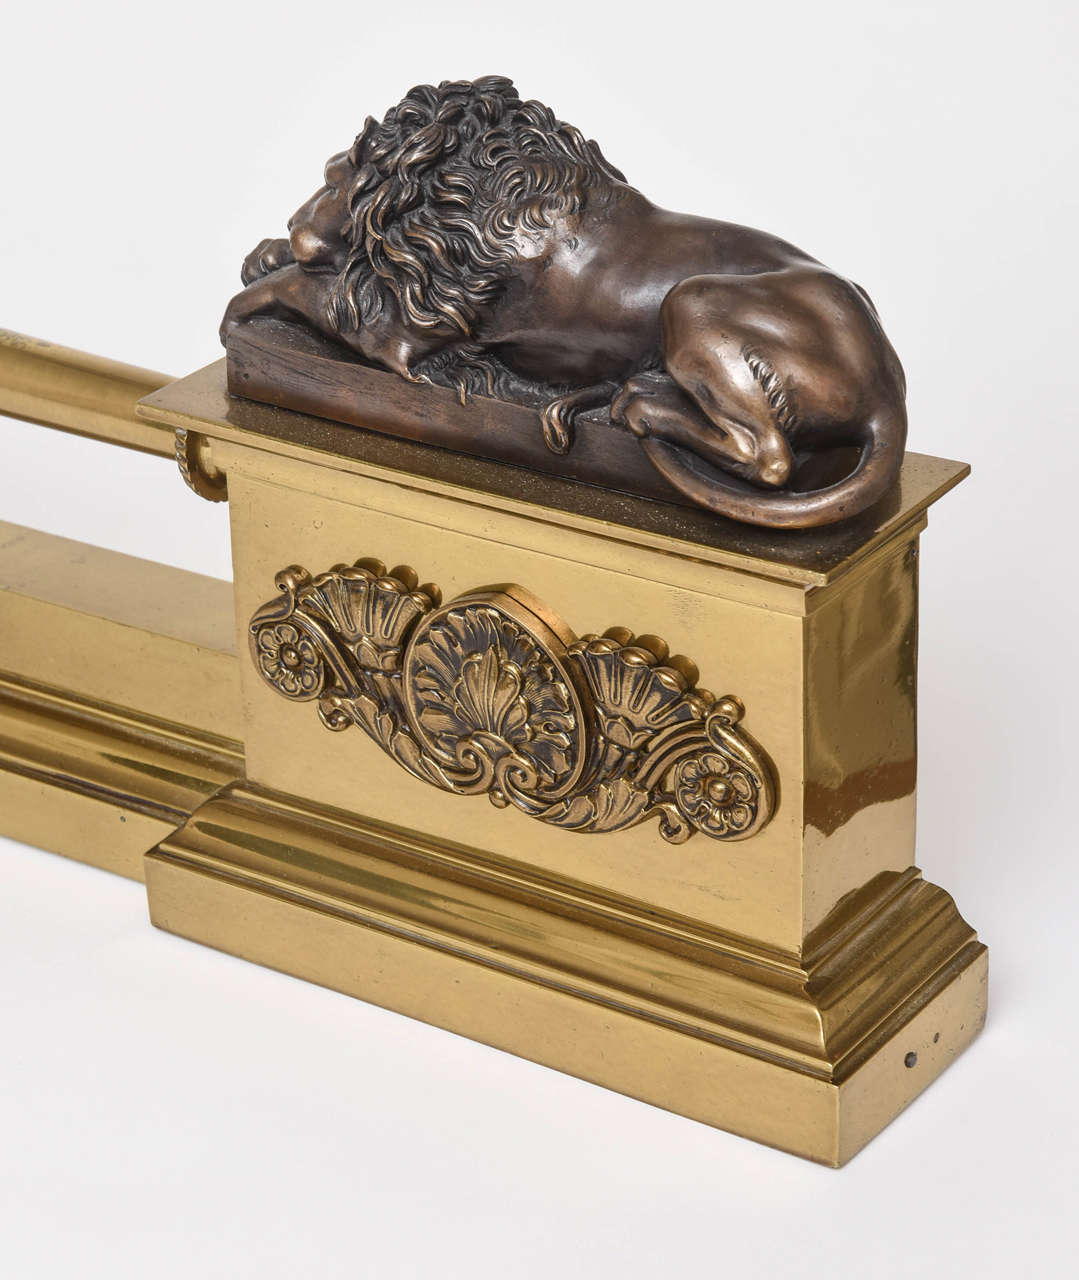 French Empire Bronze and Ormolu Fender with Recumbent Lions 1